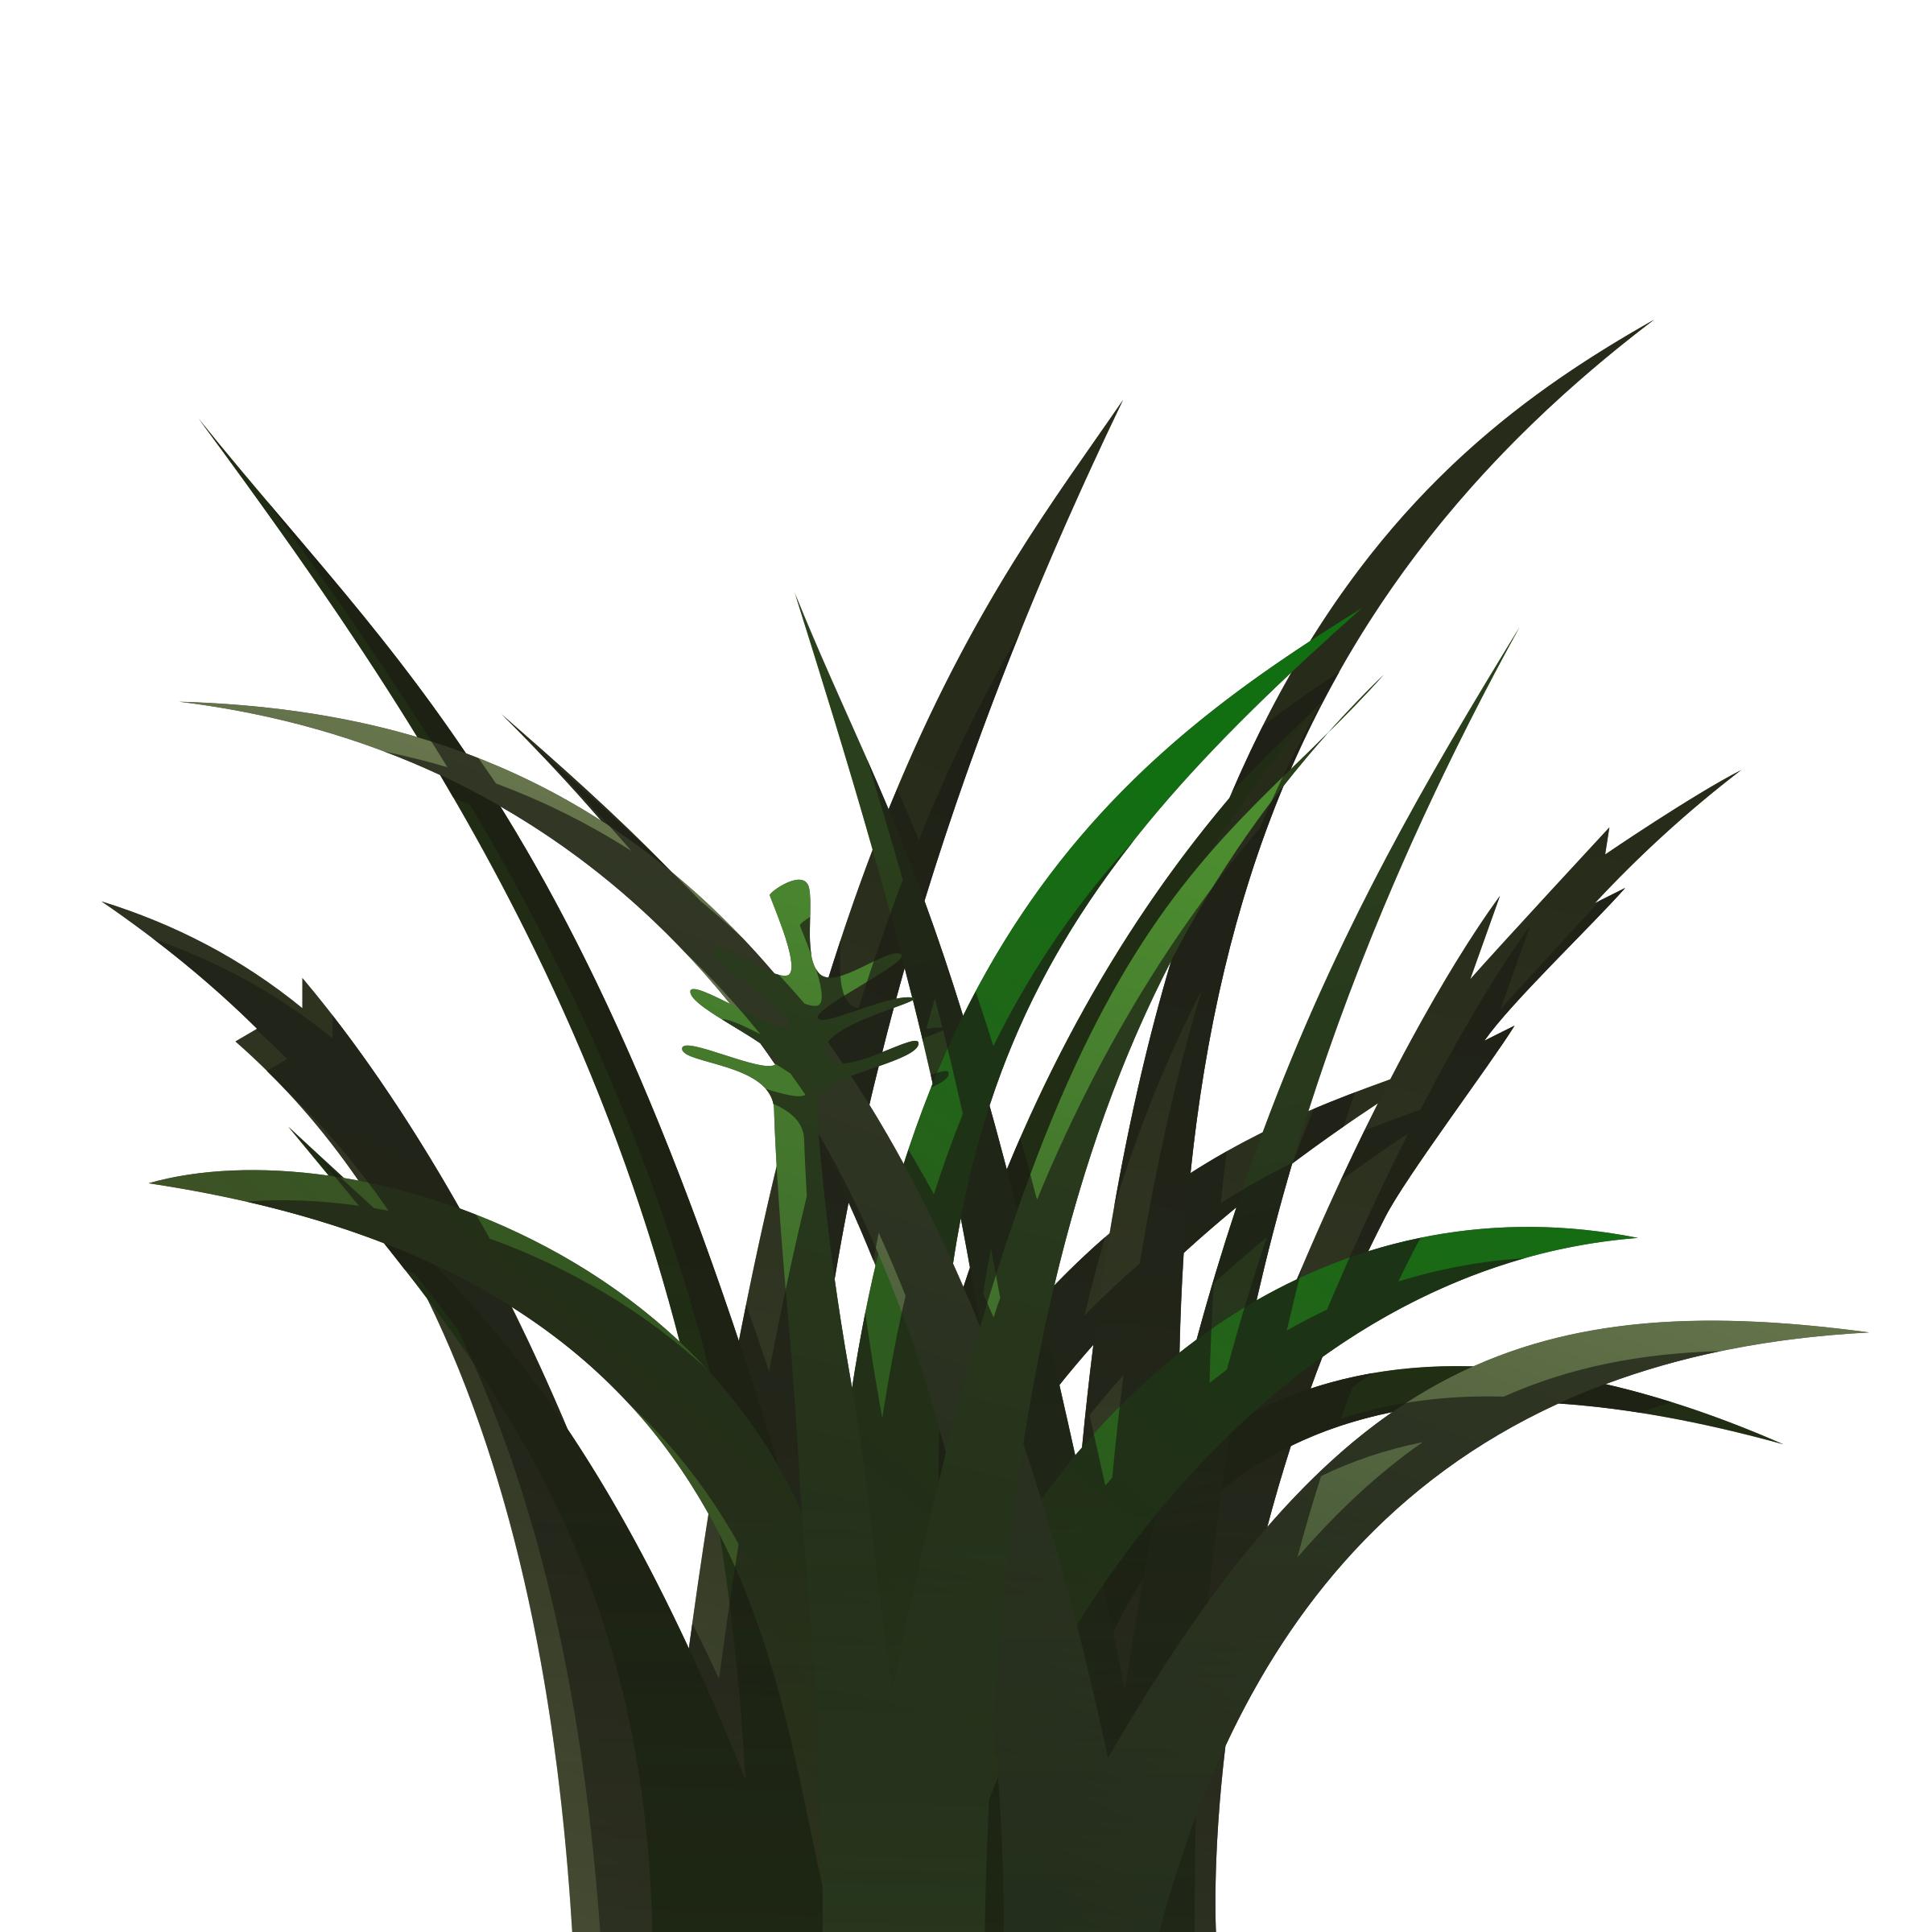 Grass shaded with layers png